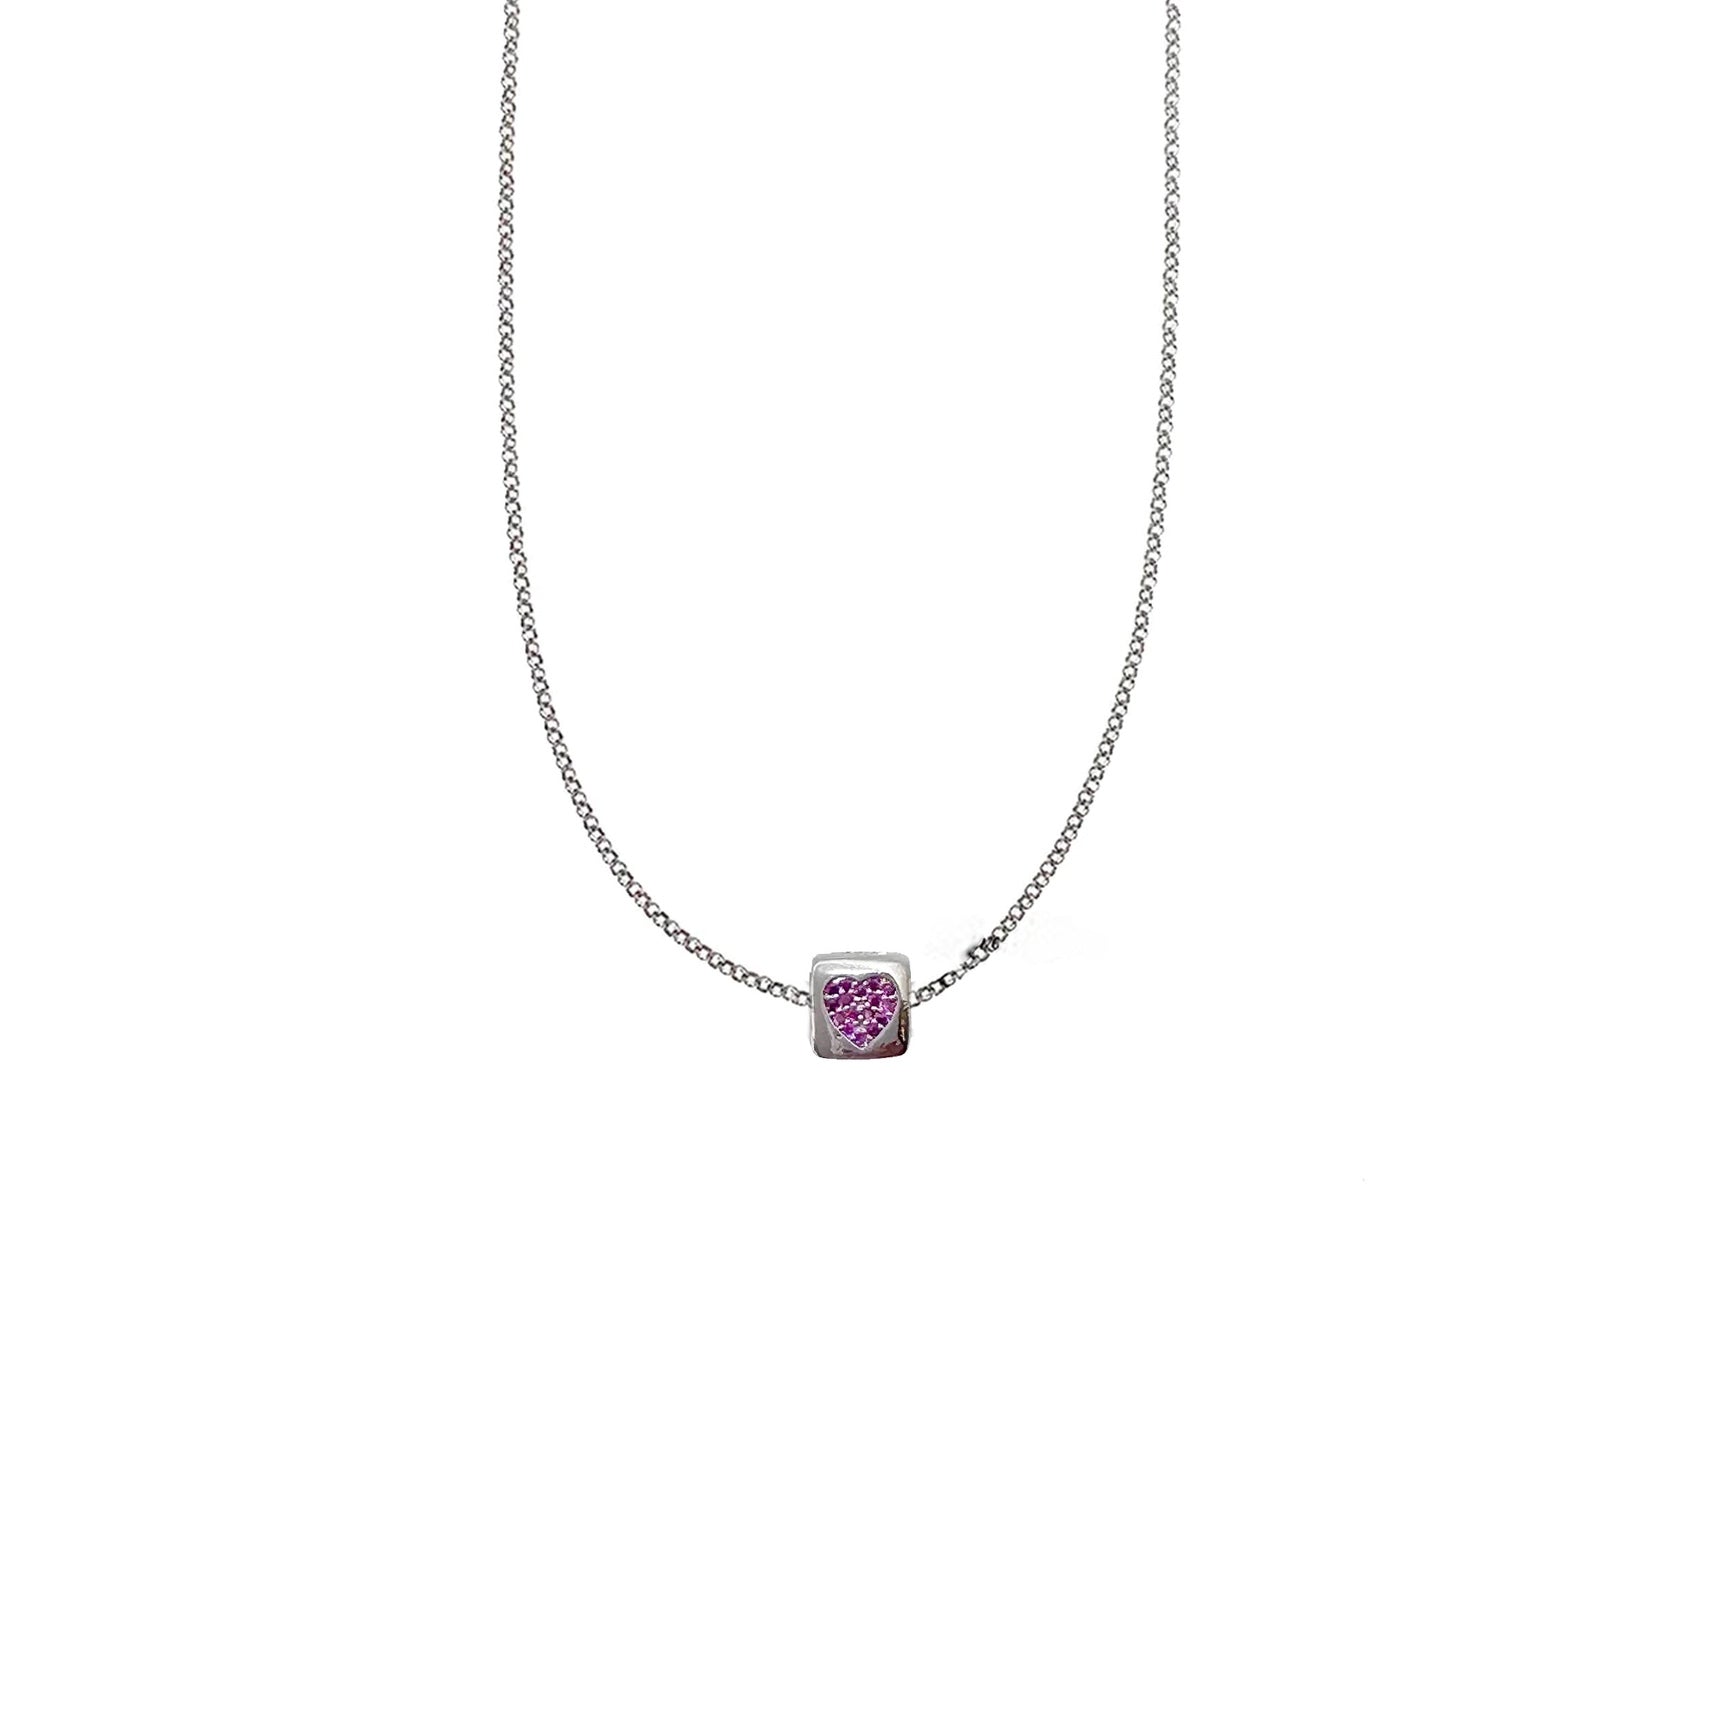 Silver/Pink Heart Block necklace